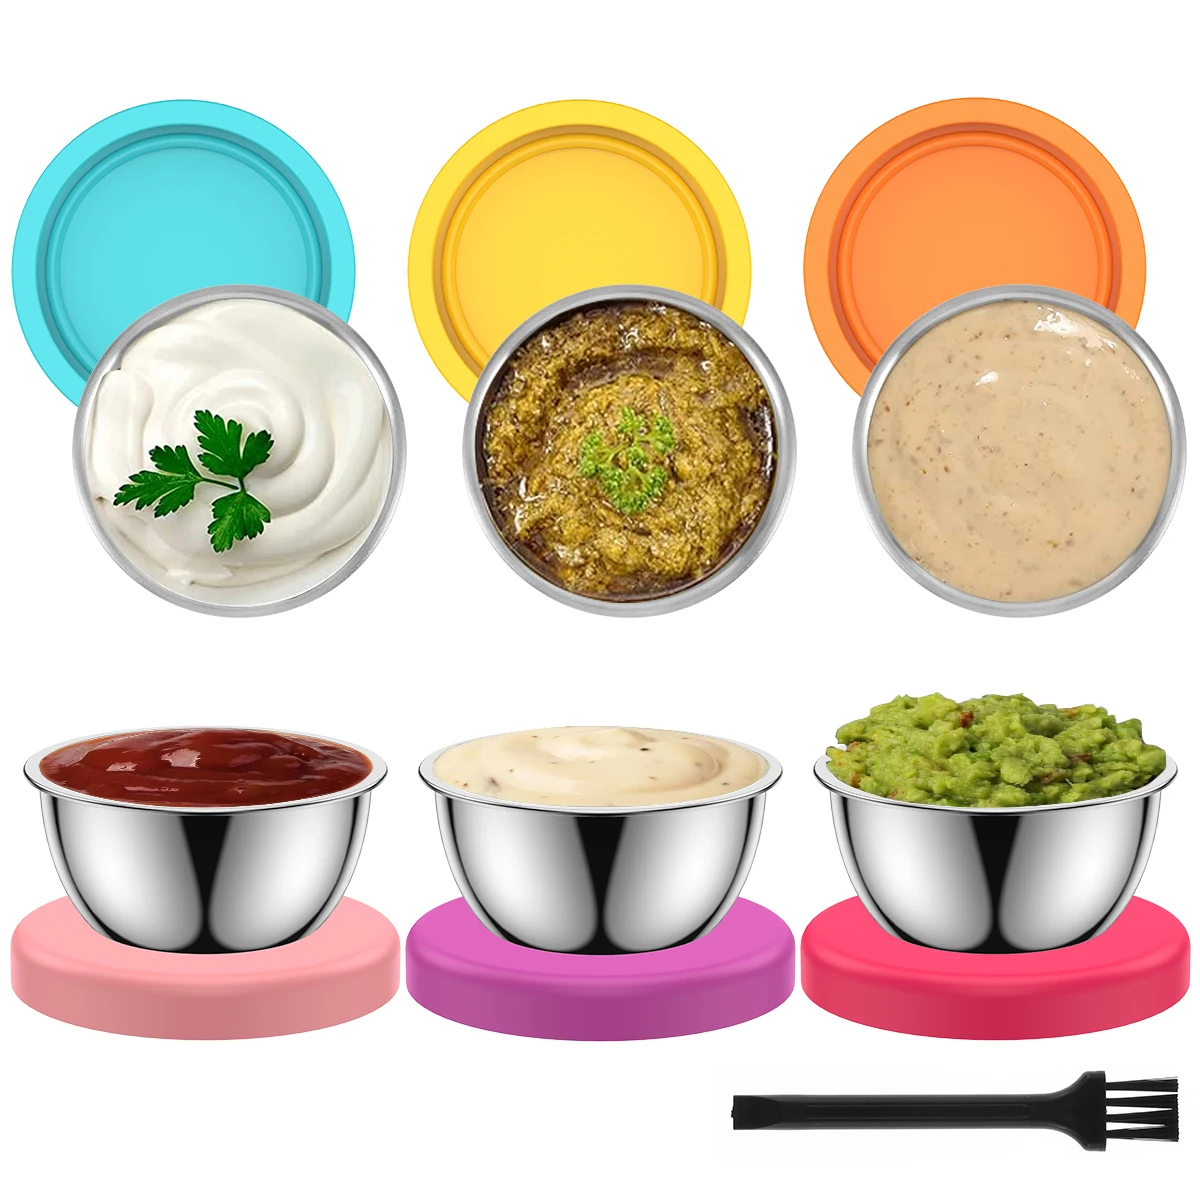 https://ae01.alicdn.com/kf/S04ac4447ab9b4aaf888c9d8c95e9a118l/6Pcs-Salad-Dressing-Container-1-6oz-304-Stainless-Steel-Condiment-Containers-with-Lids-Easy-Open-Leakproof.jpg